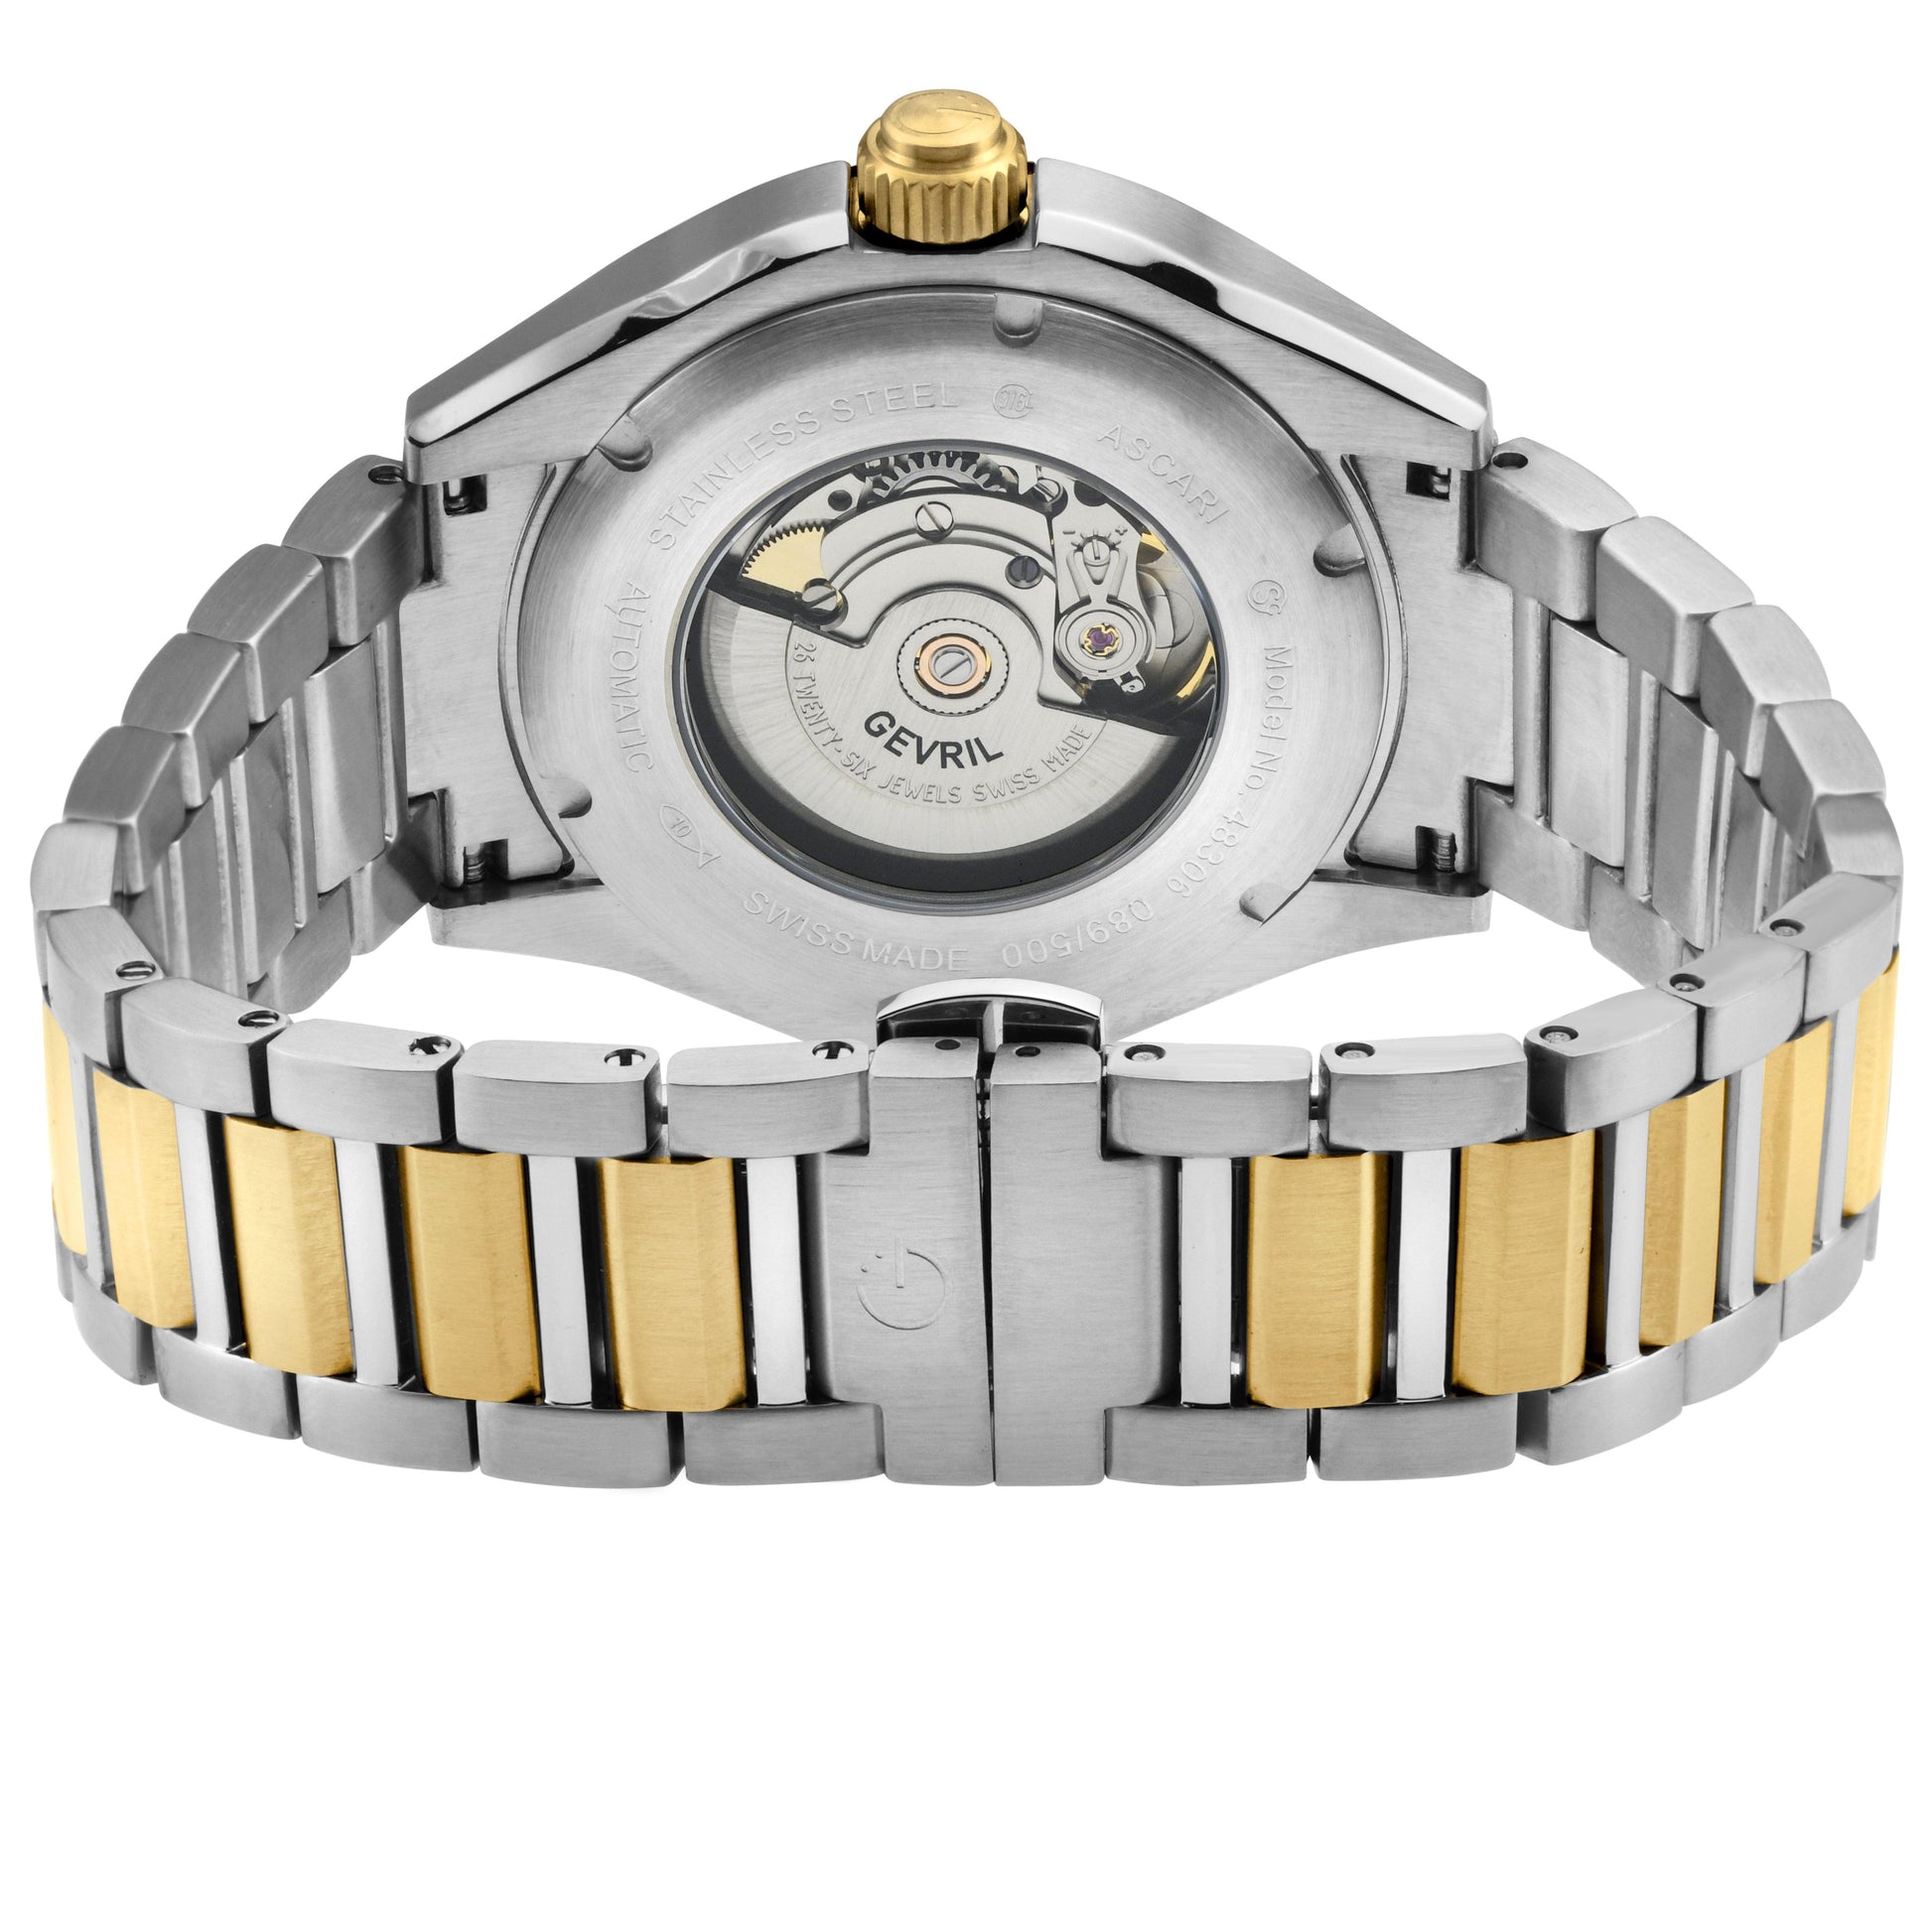 Gevril-Luxury-Swiss-Watches-Gevril Ascari-48306B